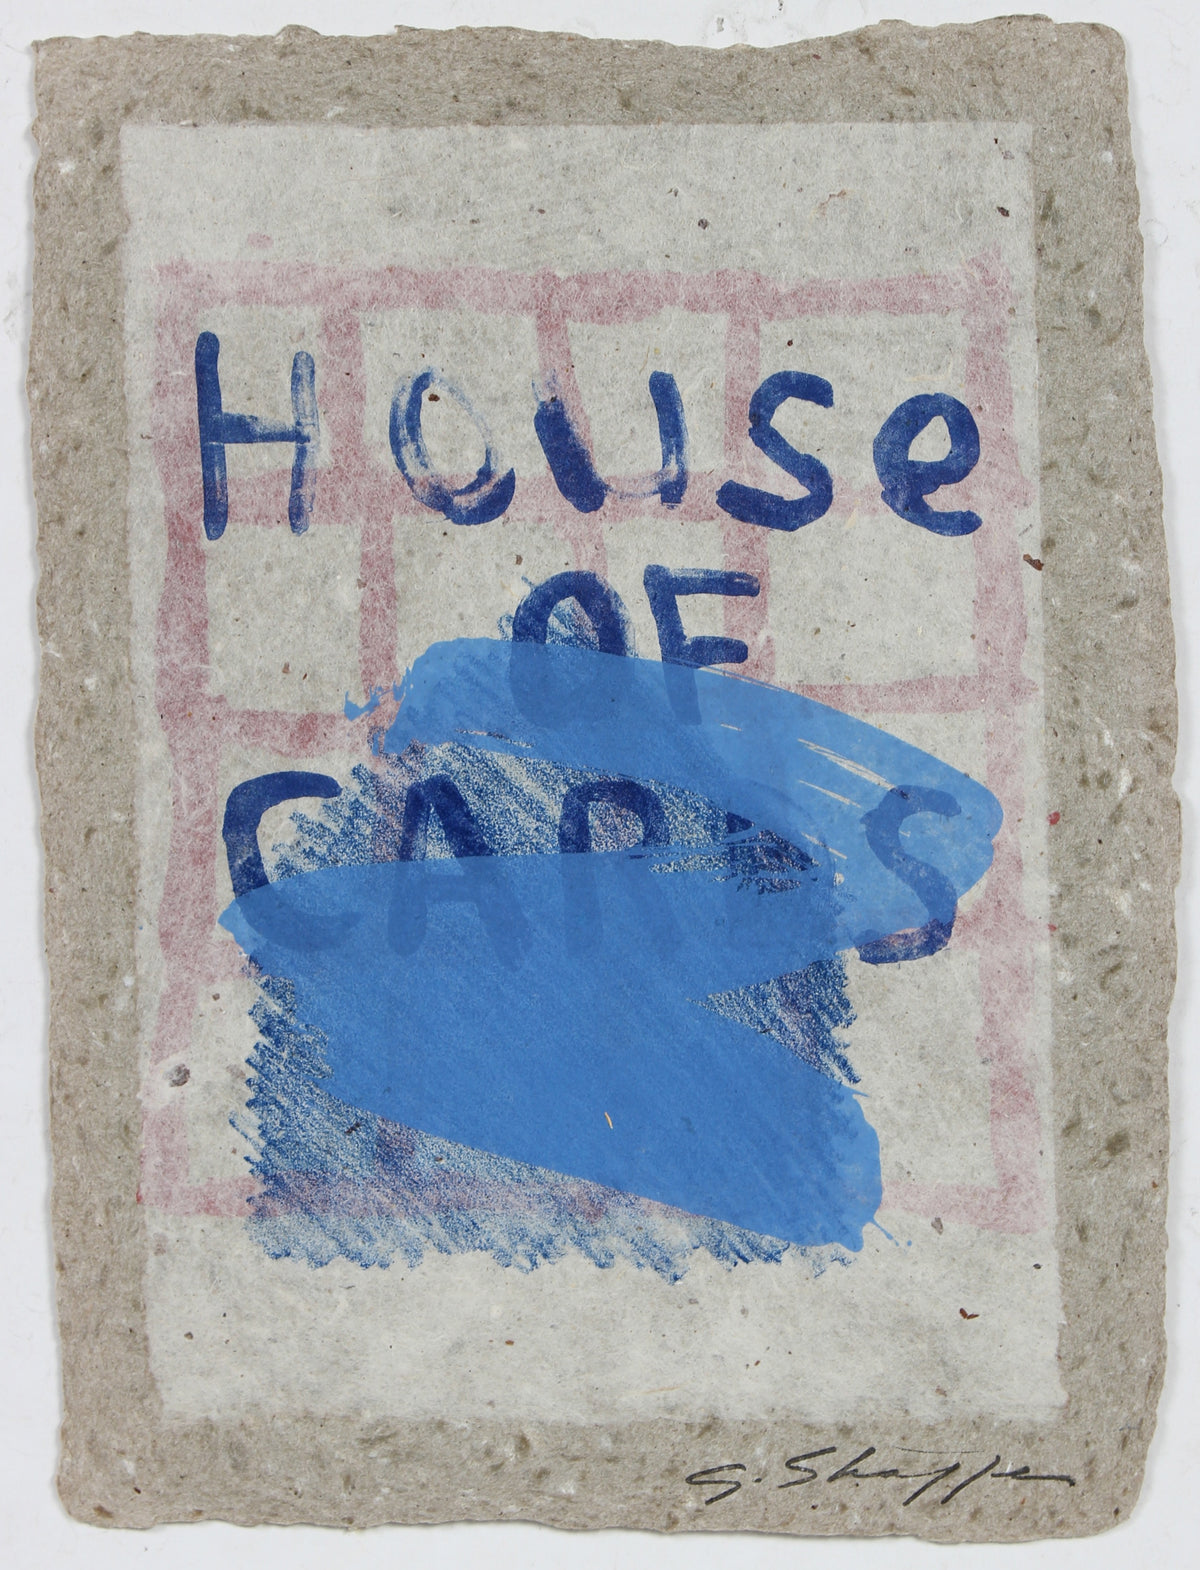 &lt;i&gt;House of Cards Series&lt;/i&gt;, Abstracted Graphic Block &lt;br&gt;1992 Lithograph &lt;br&gt;&lt;br&gt;#96829